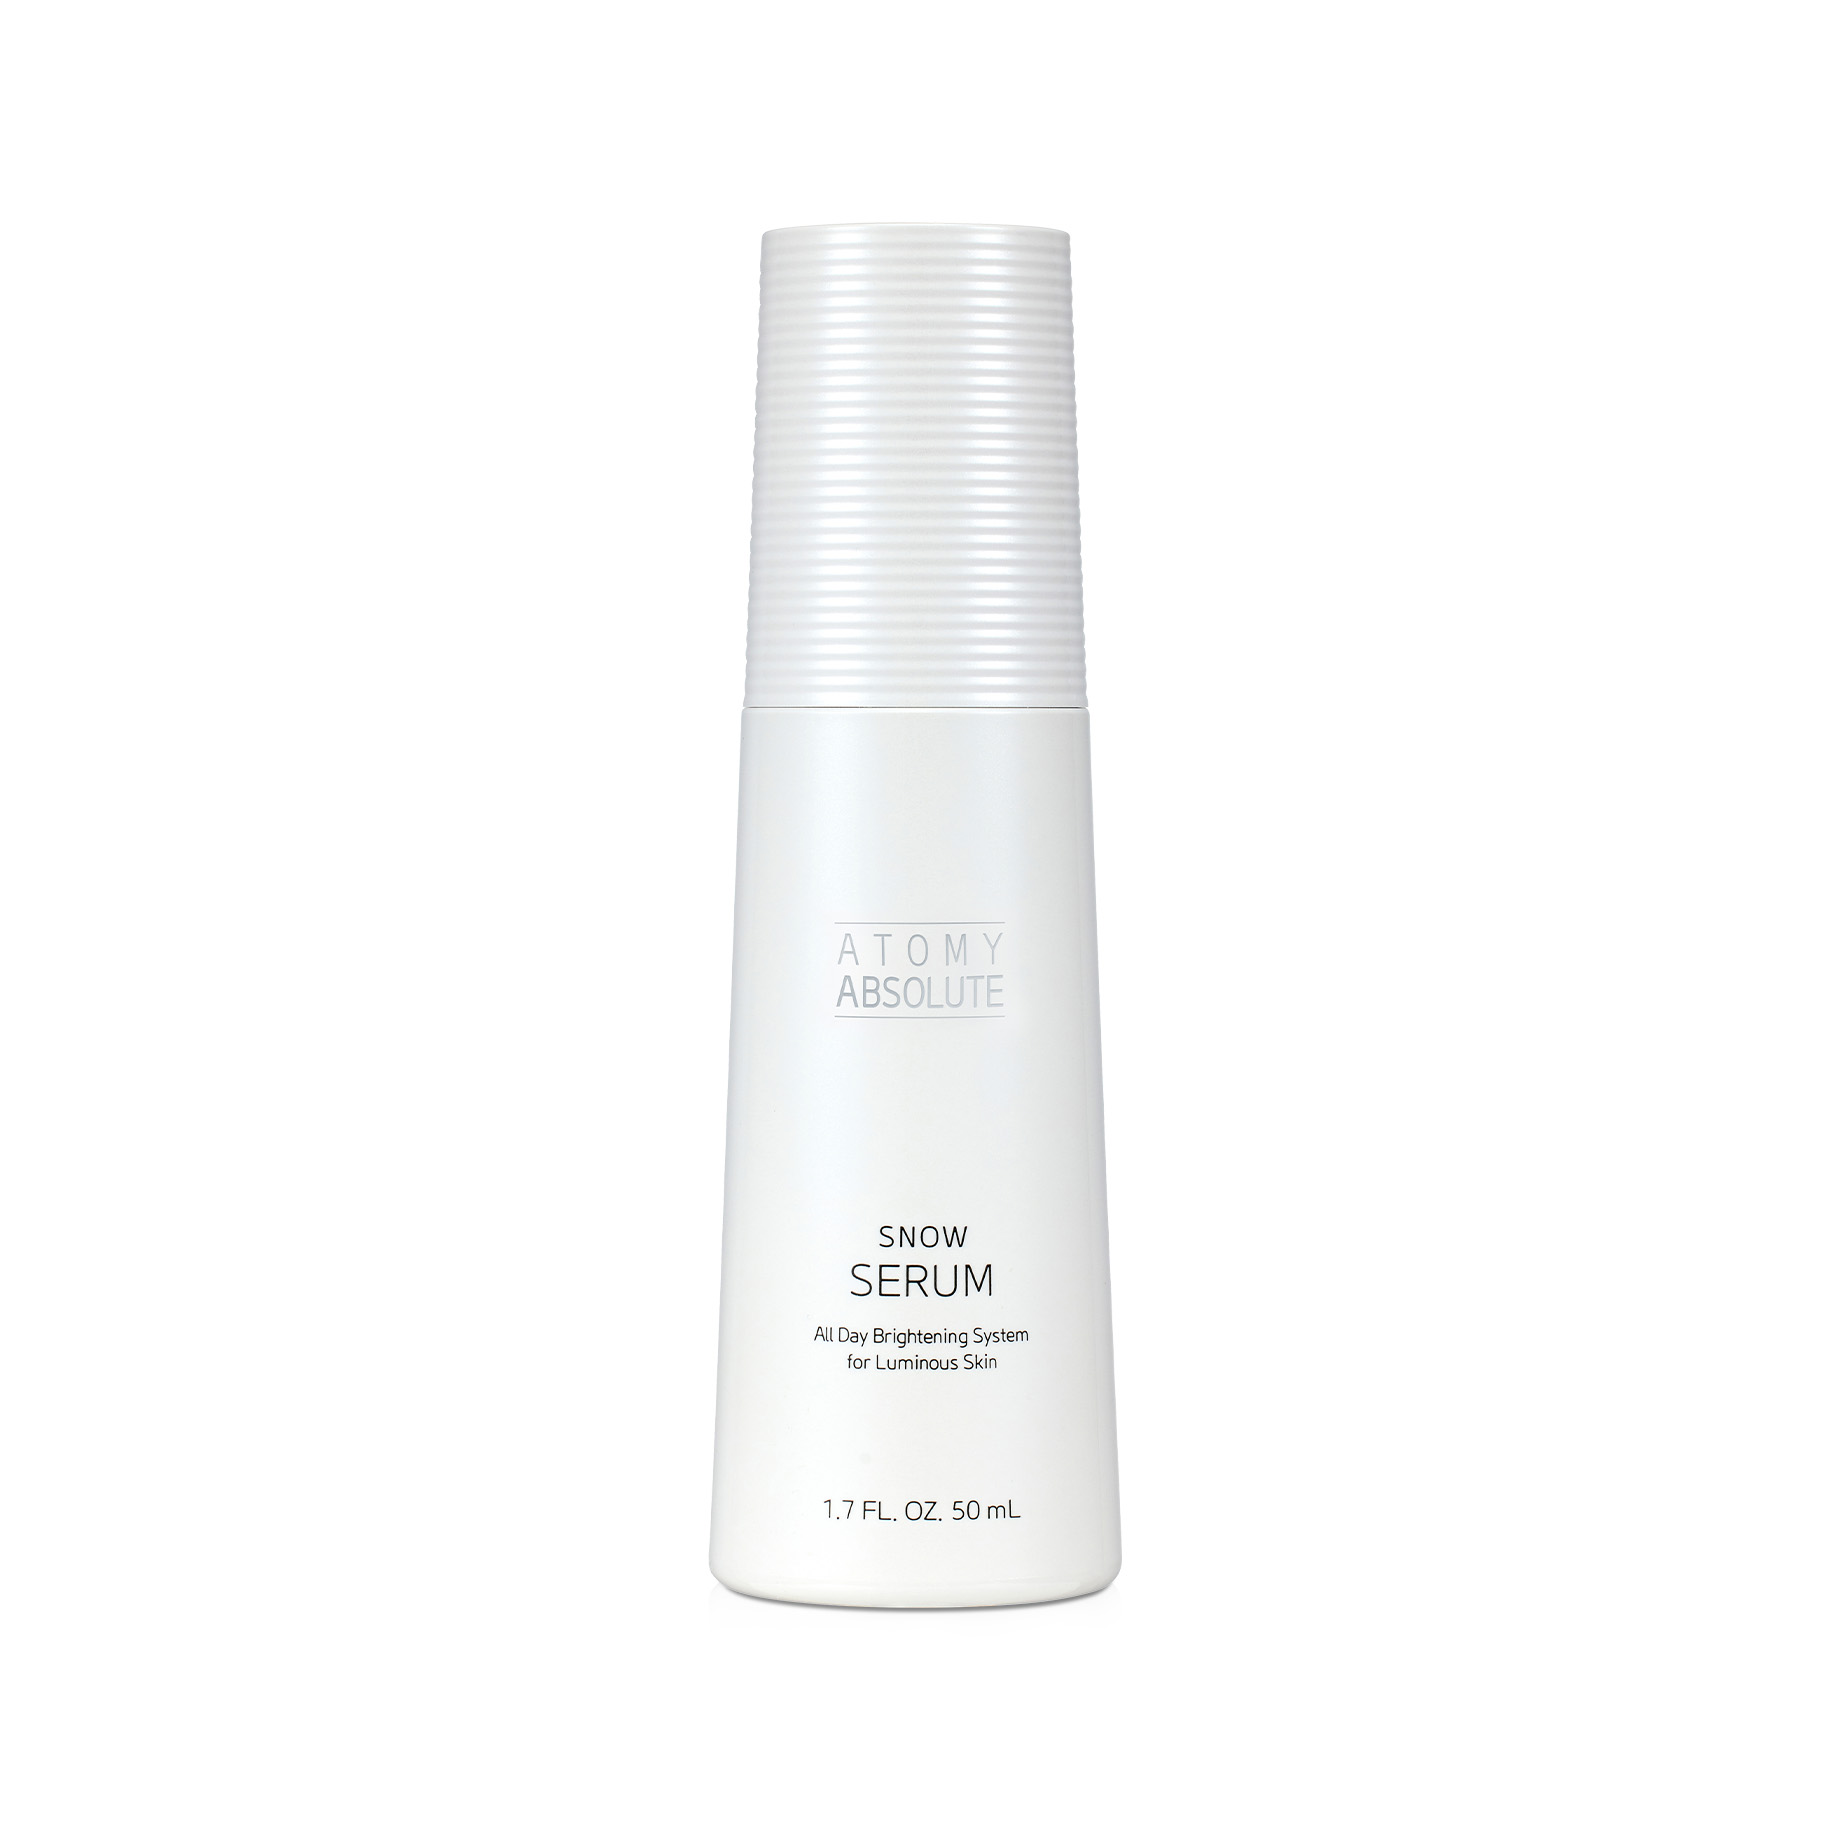 Atomy Absolute Snow Serum | Atomy Colombia